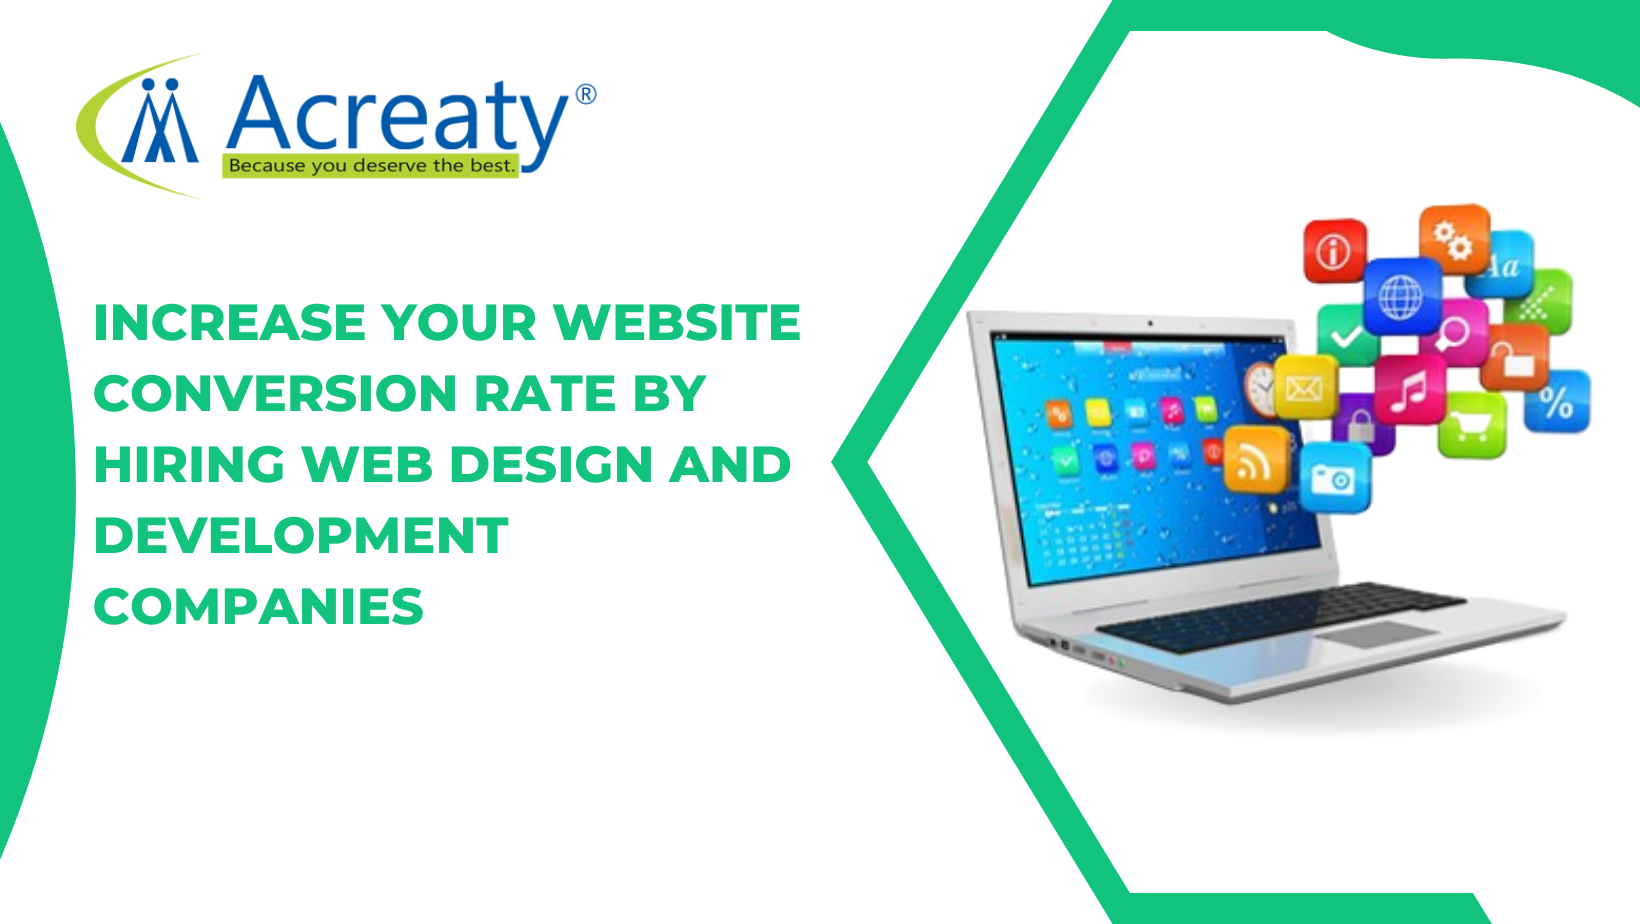 Increase Your Website Conversion Rate by Hiring Web Design and Development Companies